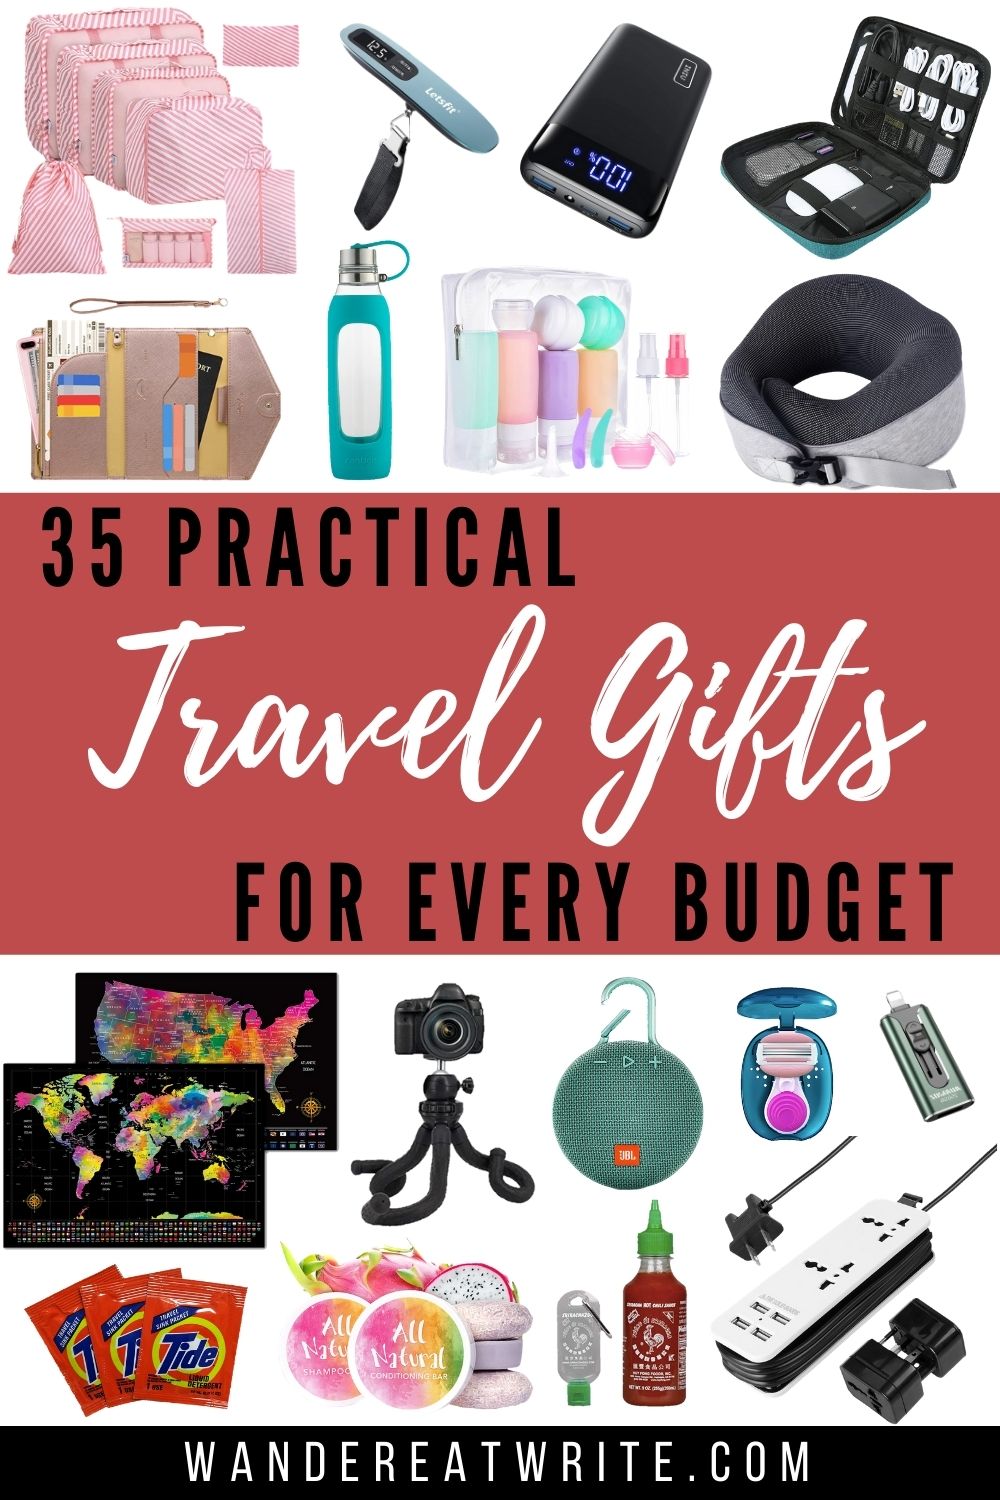 10 Trusty Travel Items for Under $10